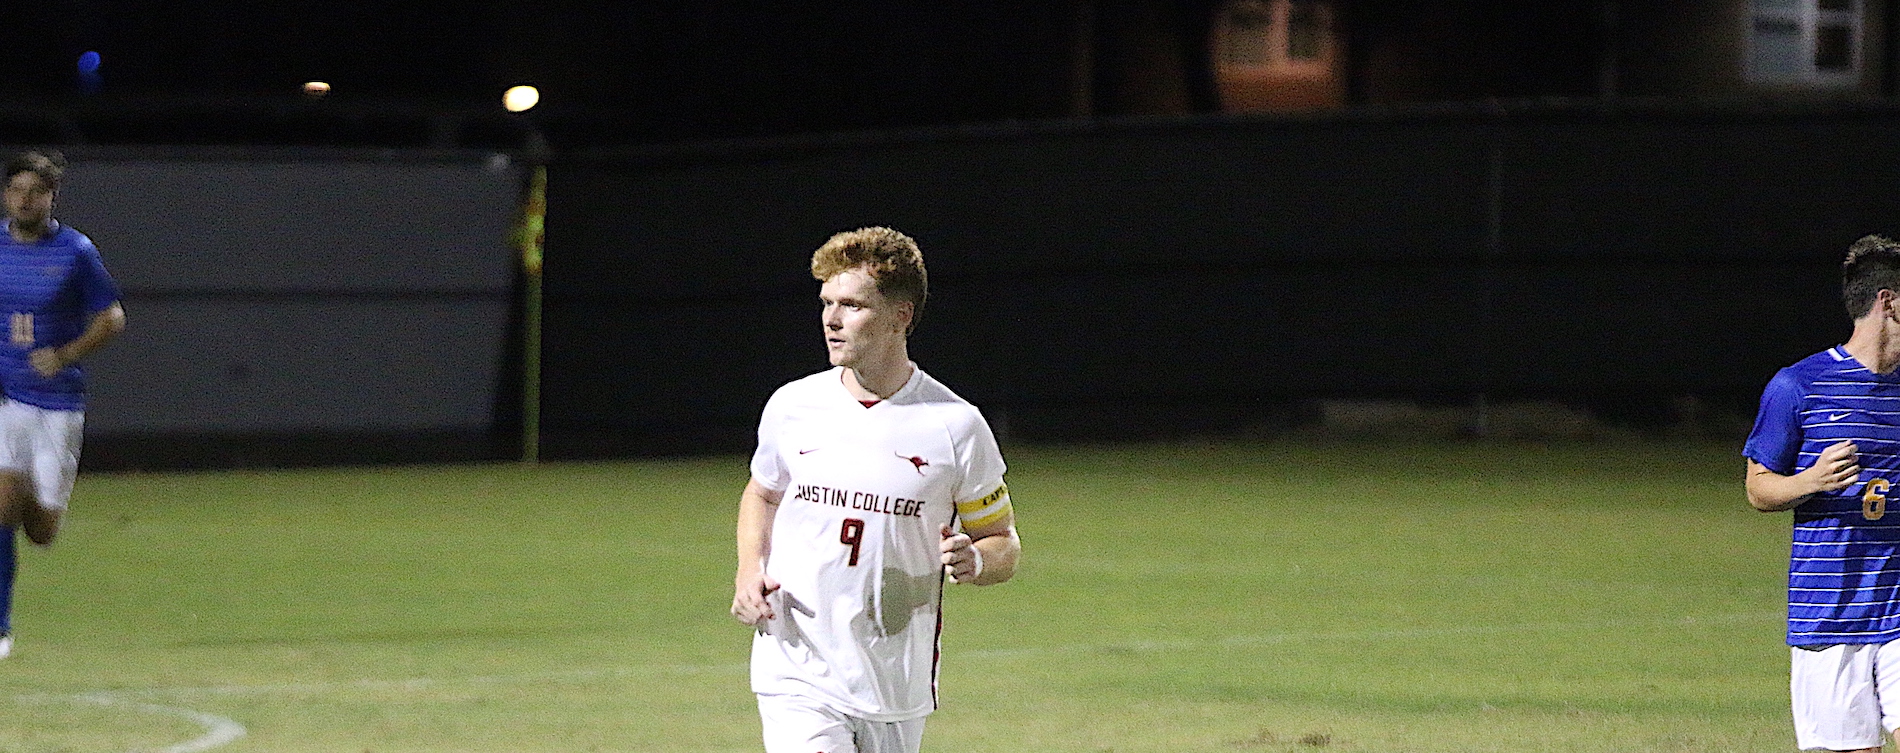 Catchpole Named SCAC Offensive Player of the Week